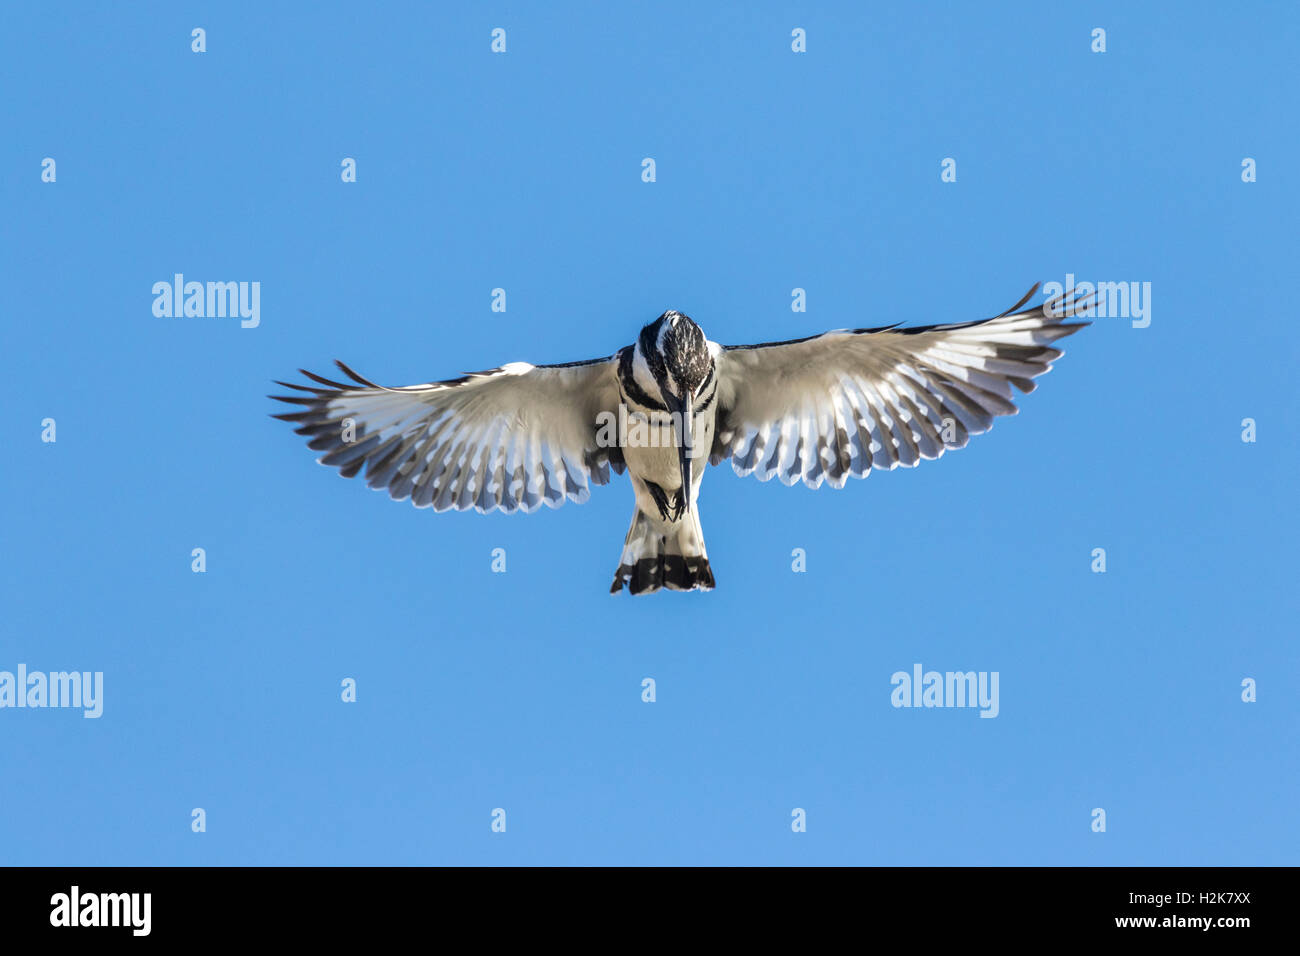 Pied Kingfisher Ceryle rudis hovering against blue sky background, Eilat, Israel Stock Photo